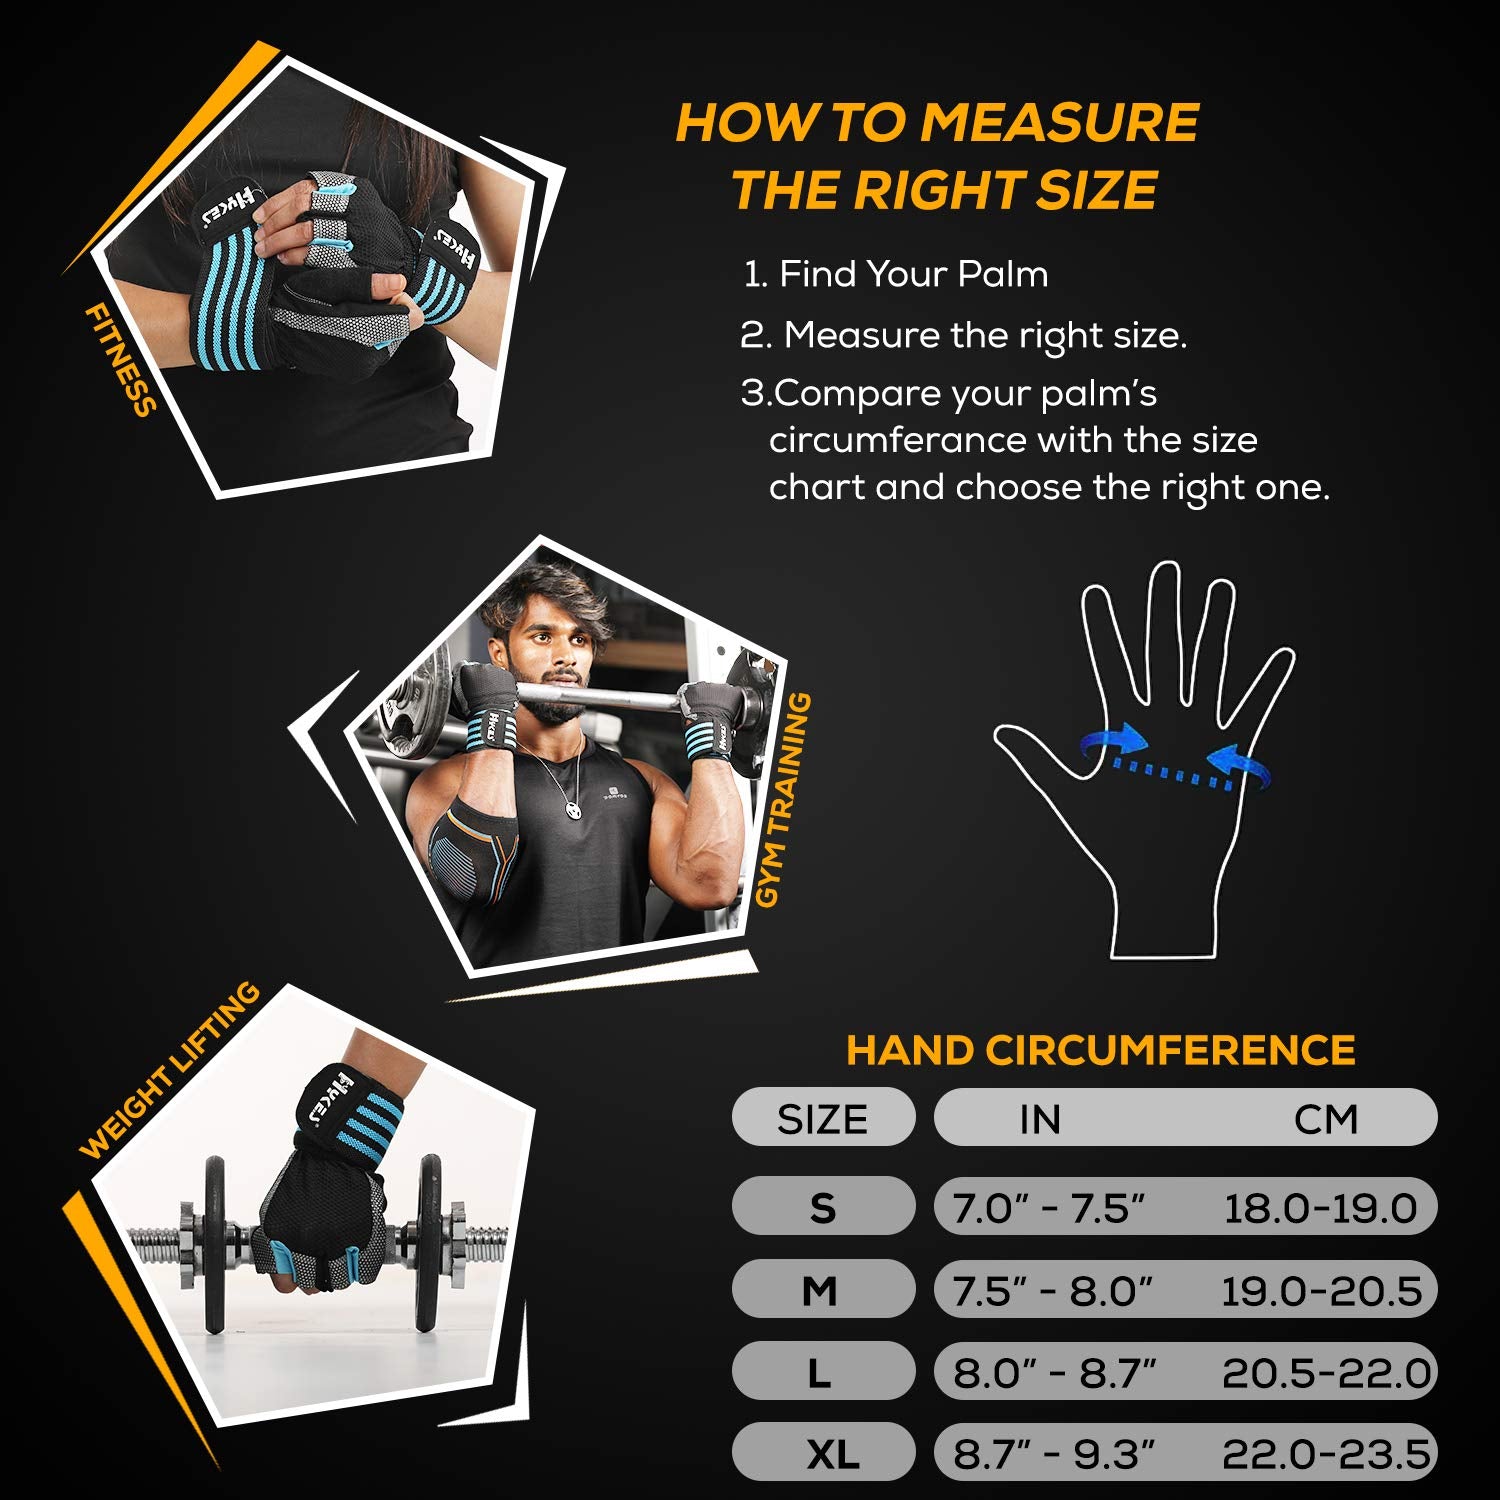 Gym Gloves with Wrist Support - Blue